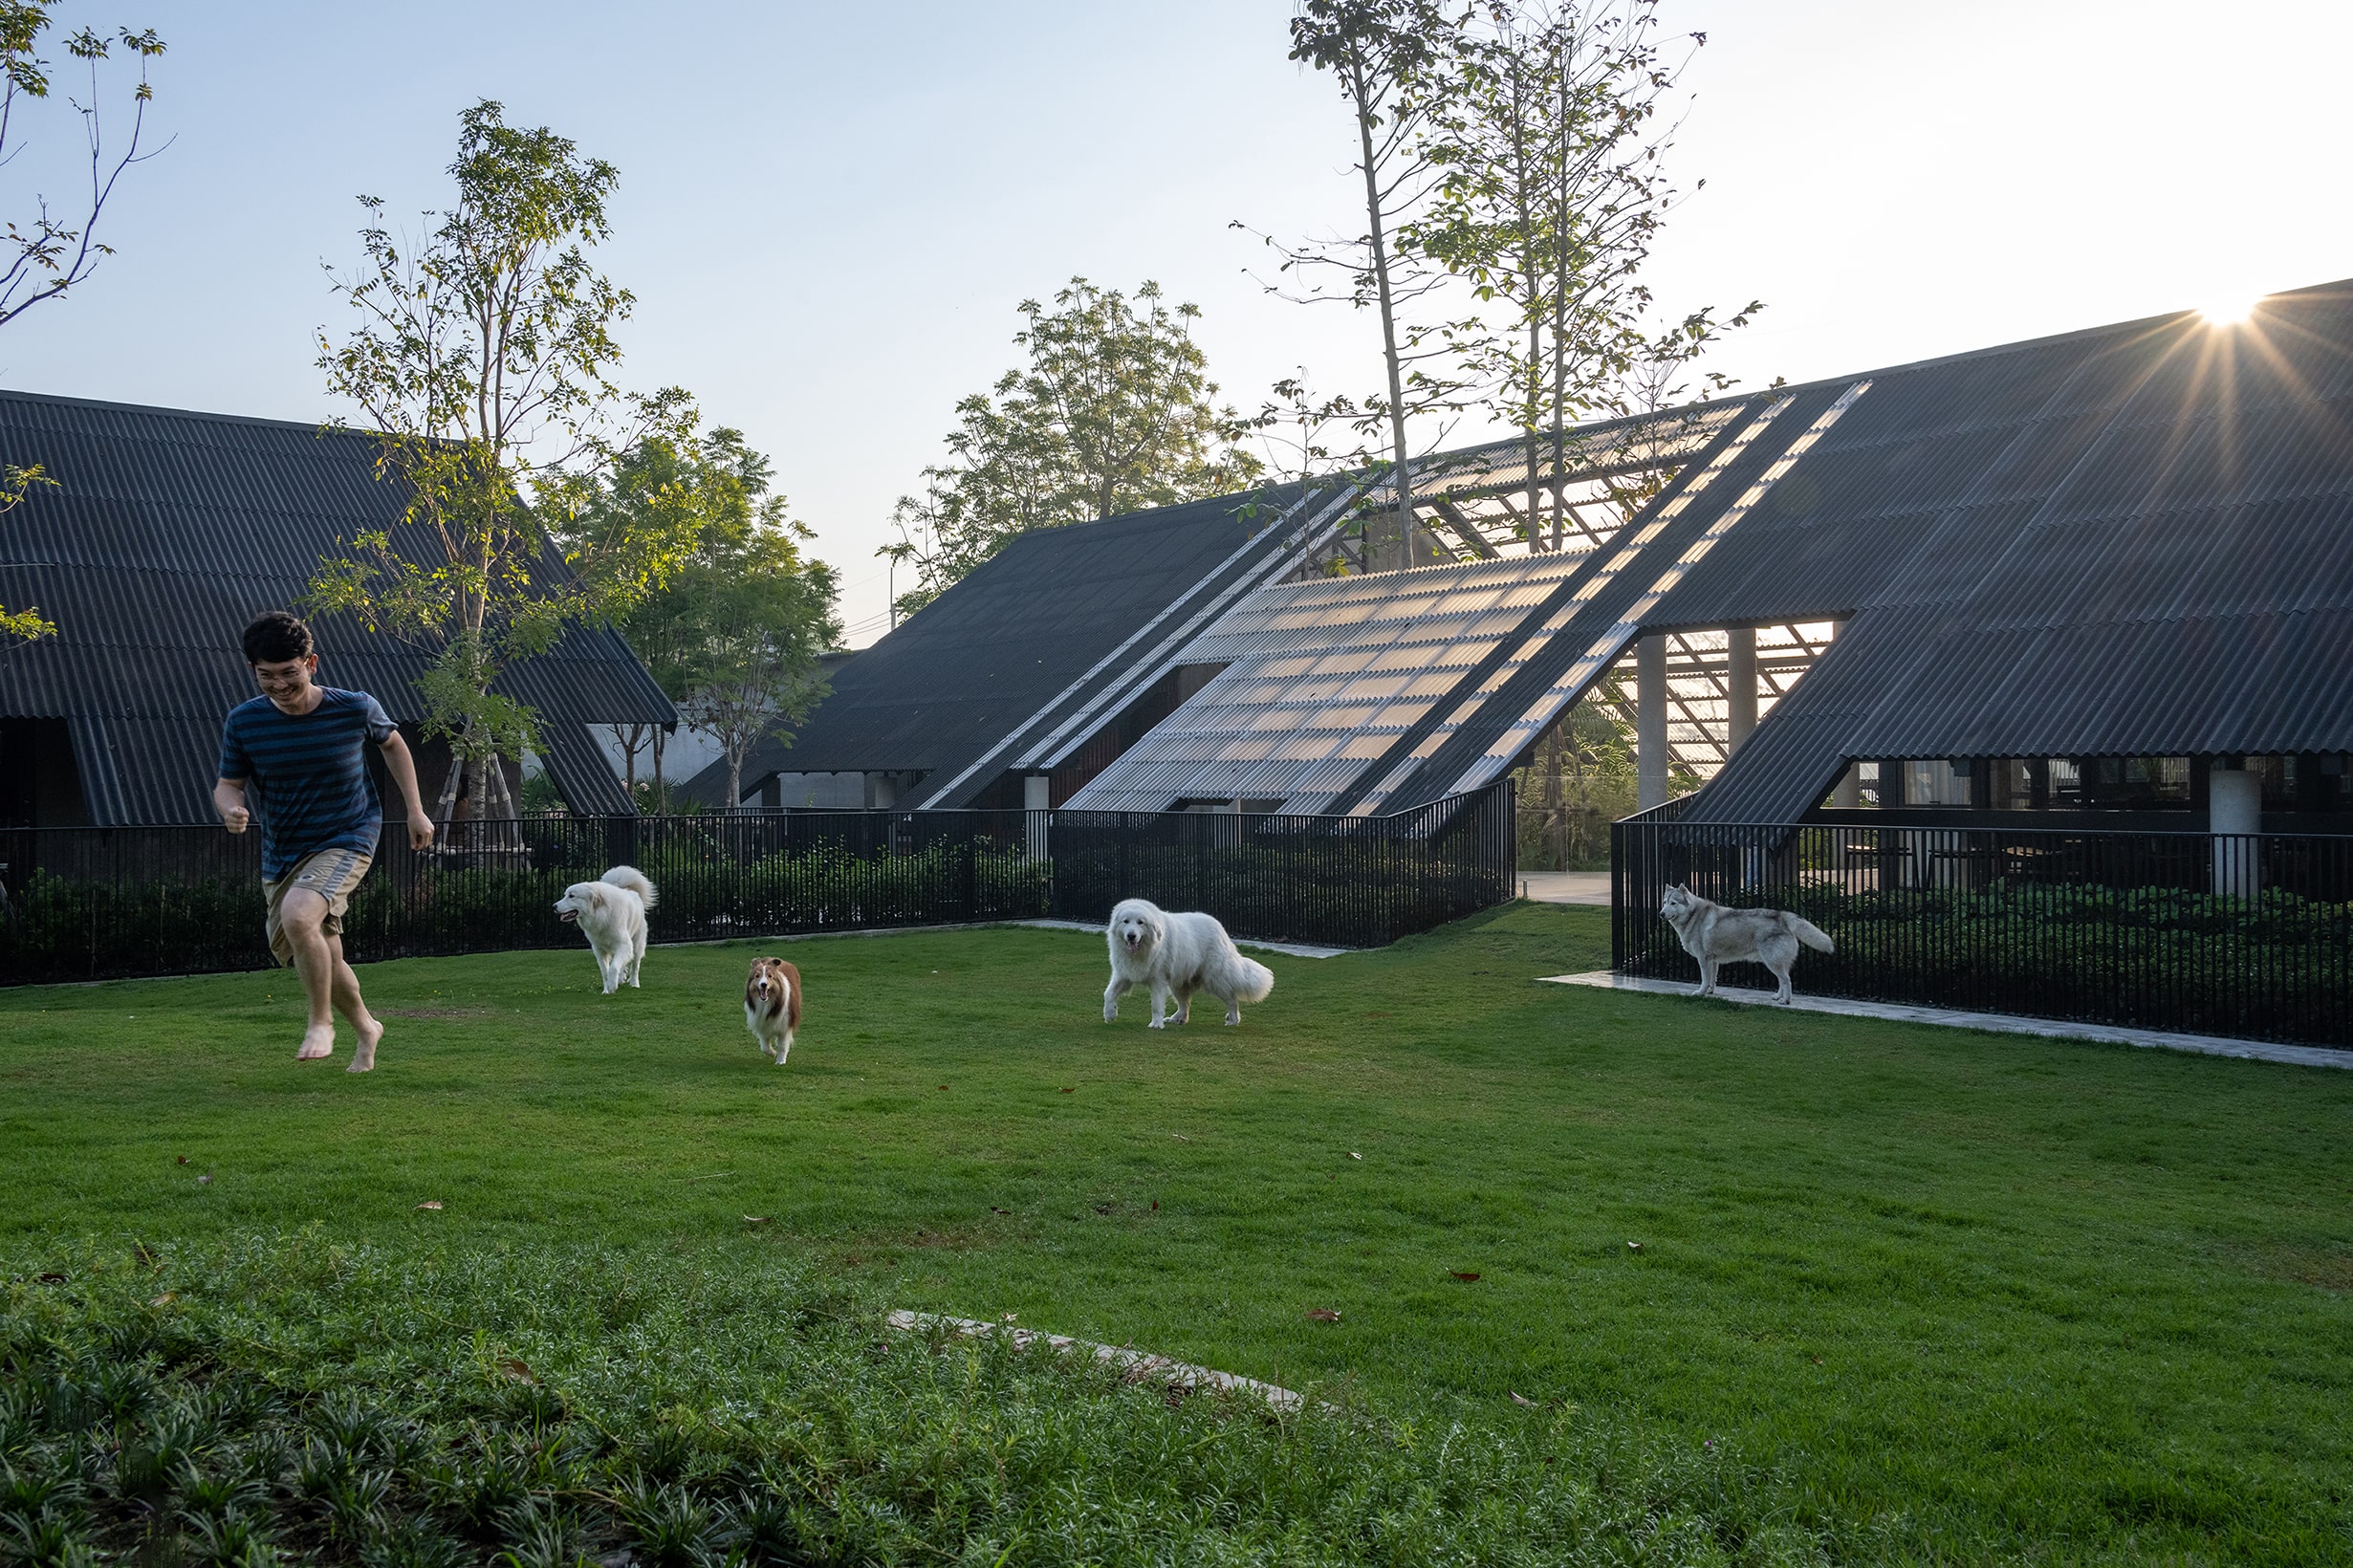 The central courtyard is the center of life, where the dogs play